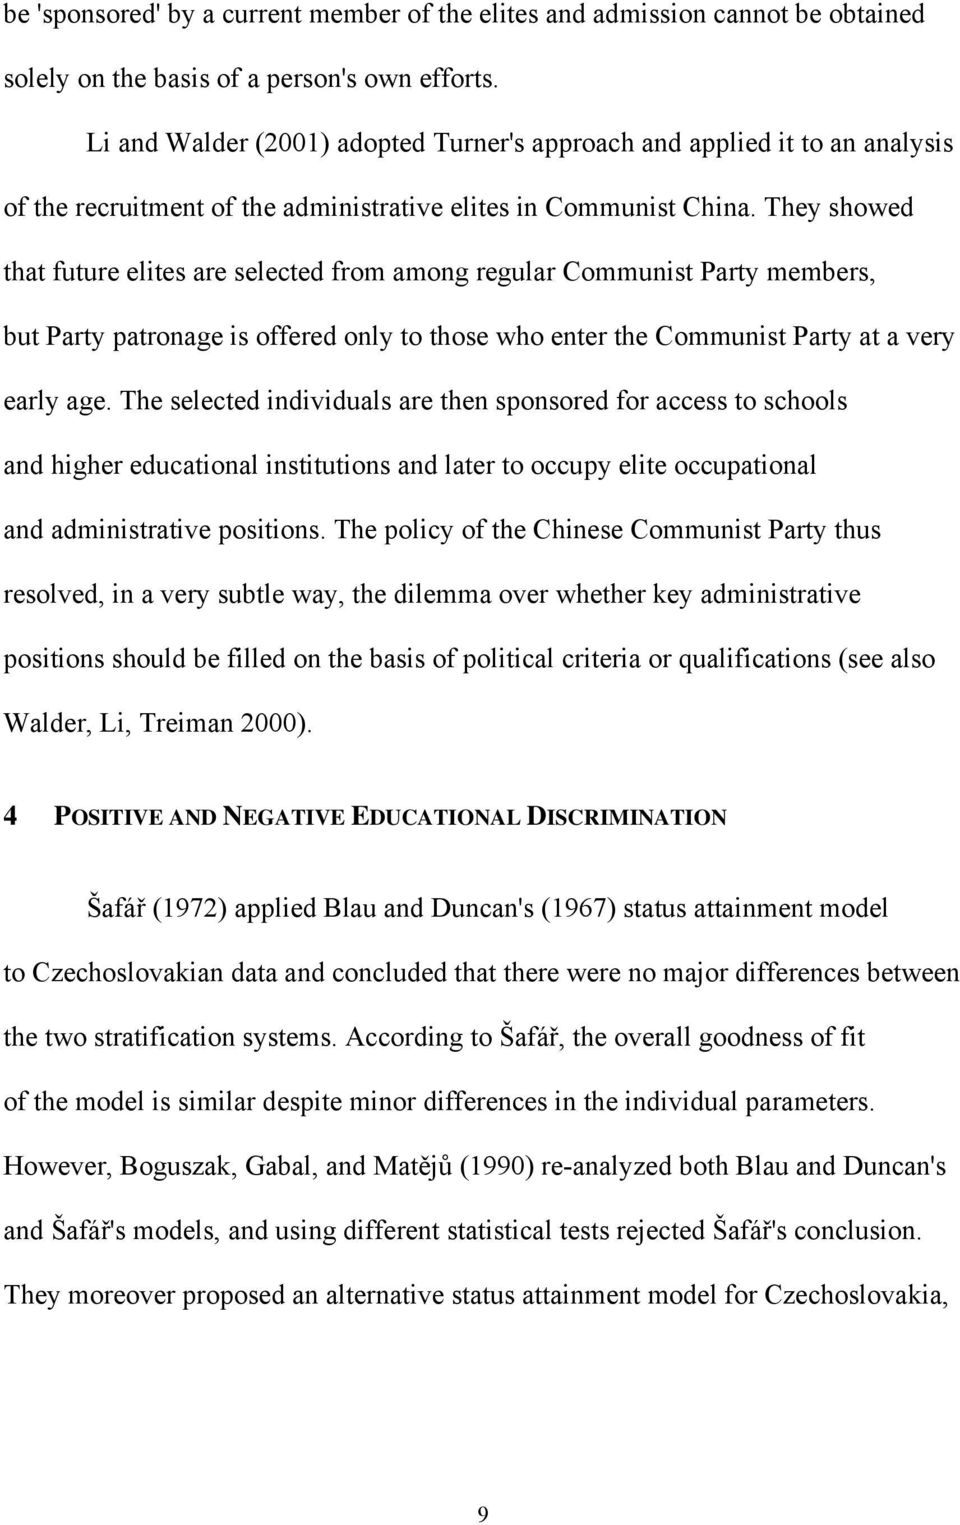 They showed that future elites are selected from among regular Communist Party members, but Party patronage is offered only to those who enter the Communist Party at a very early age.